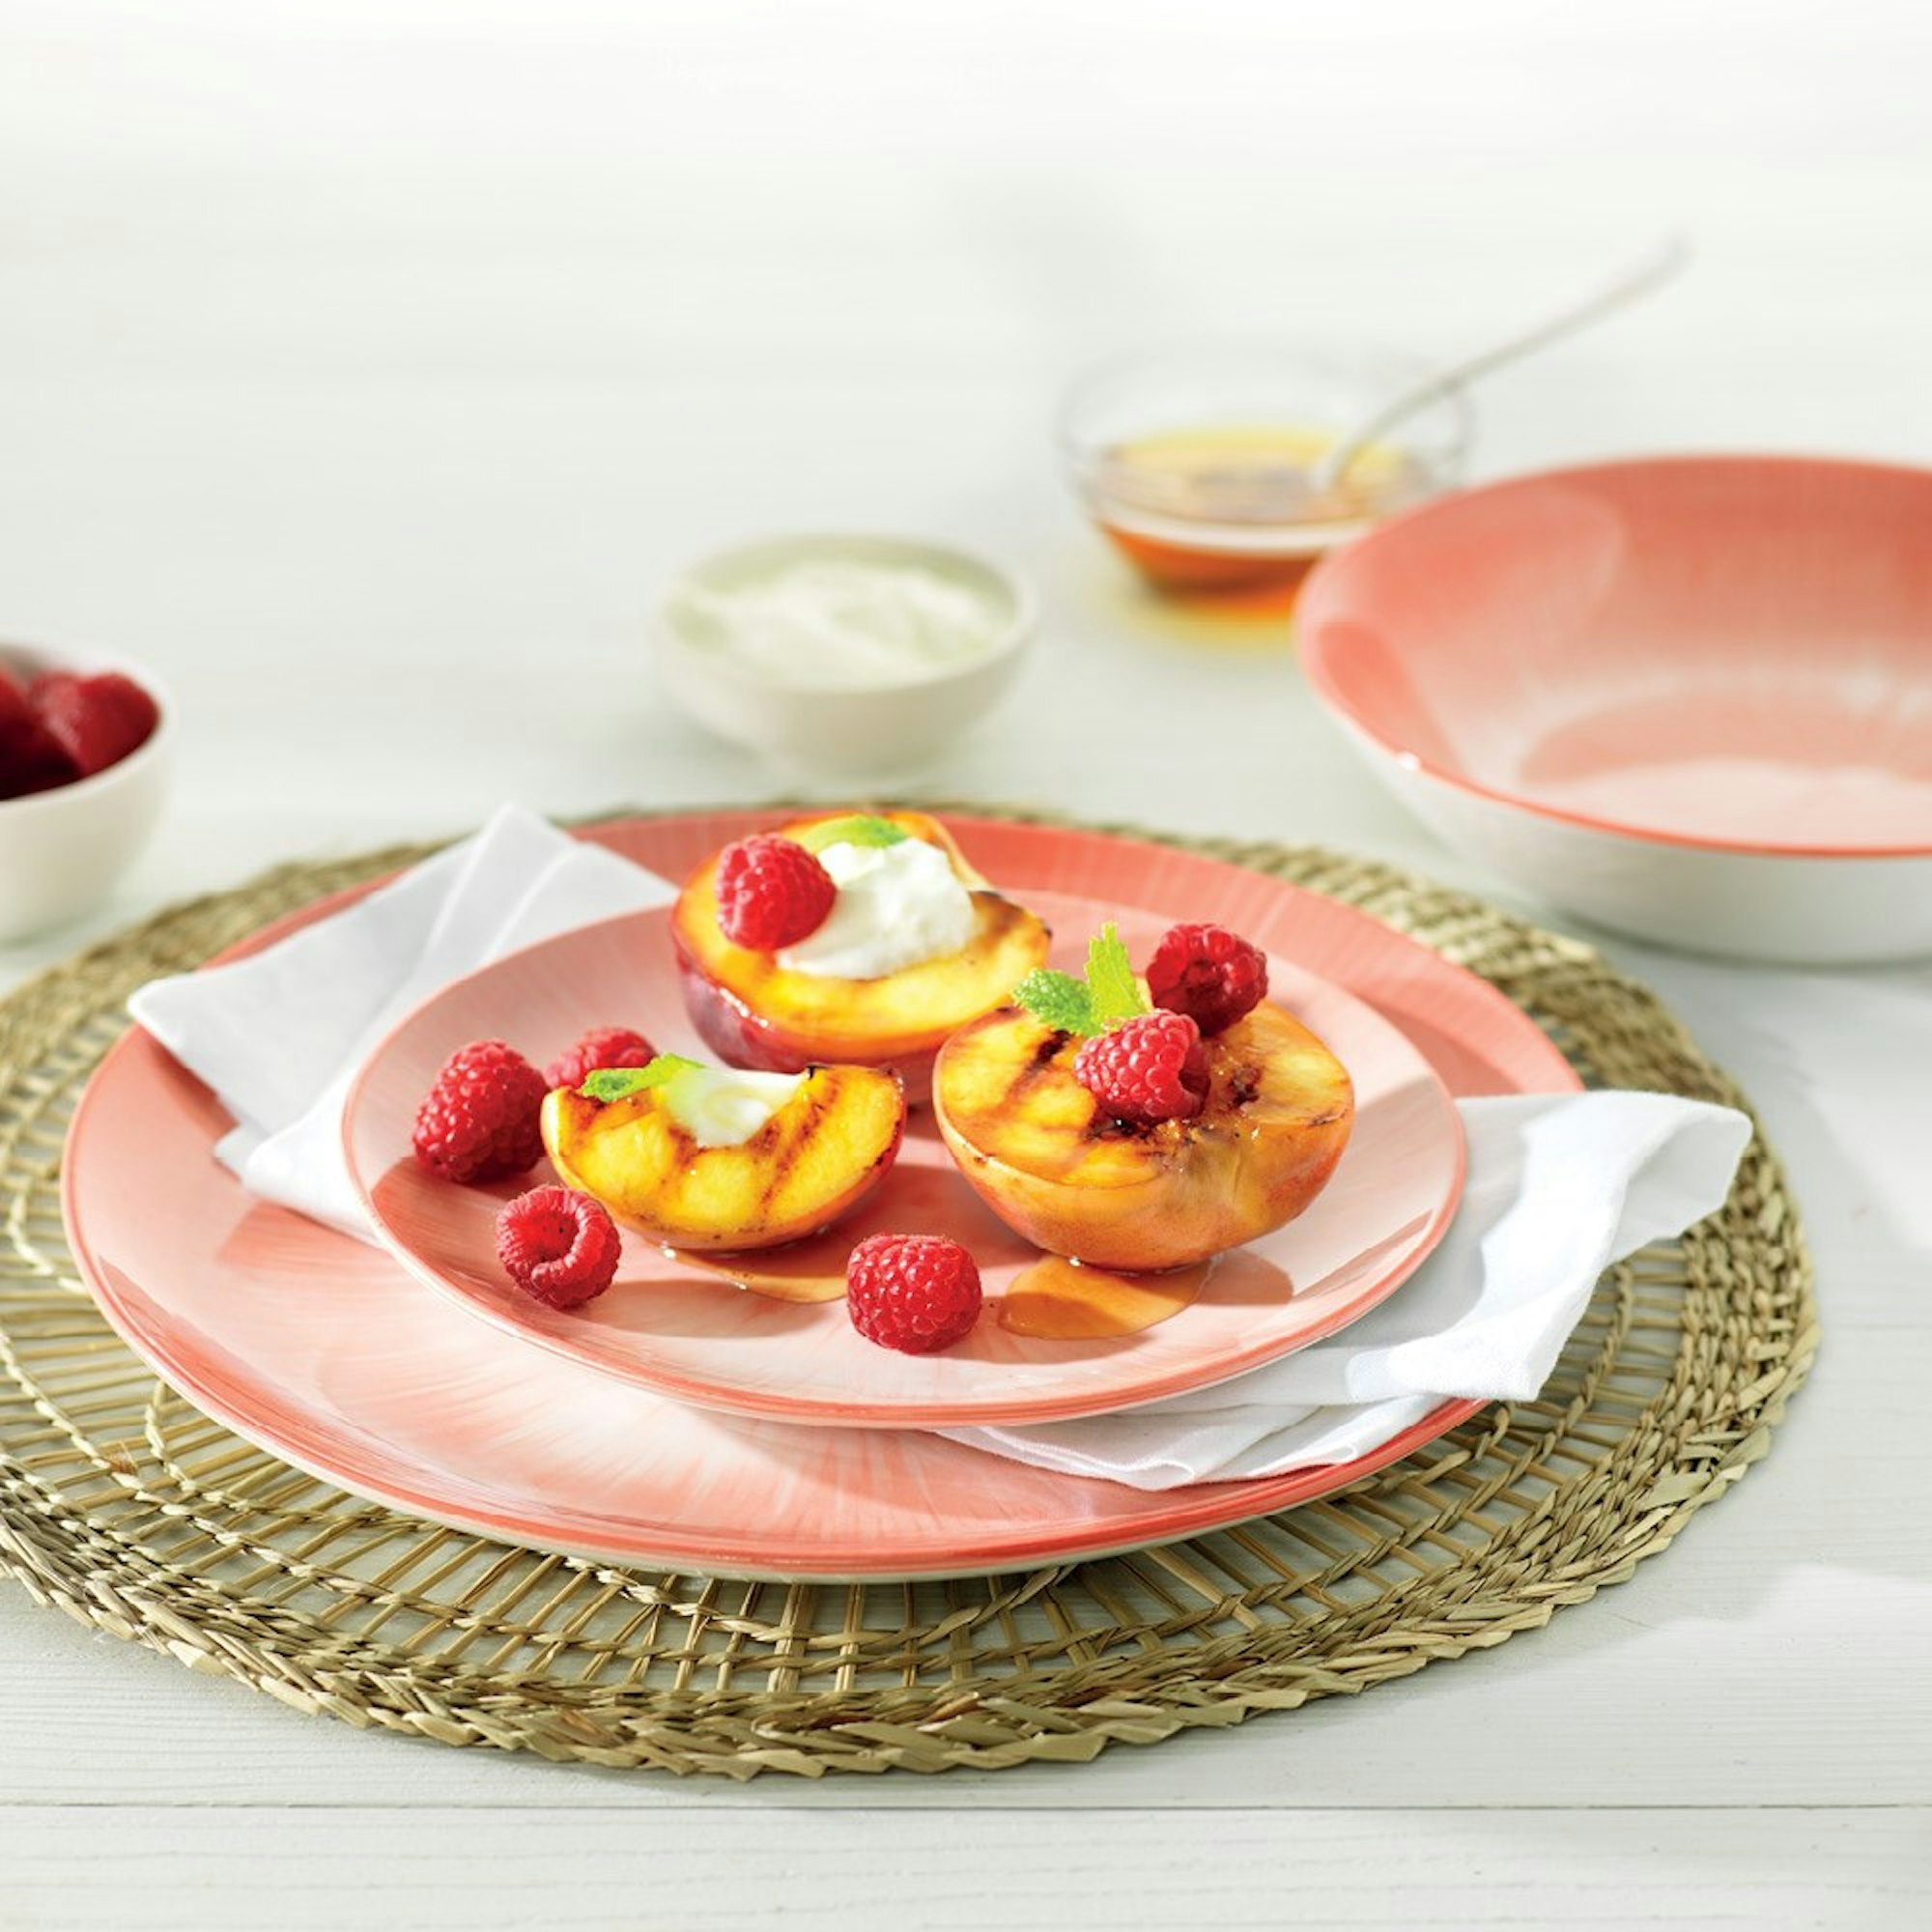 pink dinner set on rattan placemat with fruit